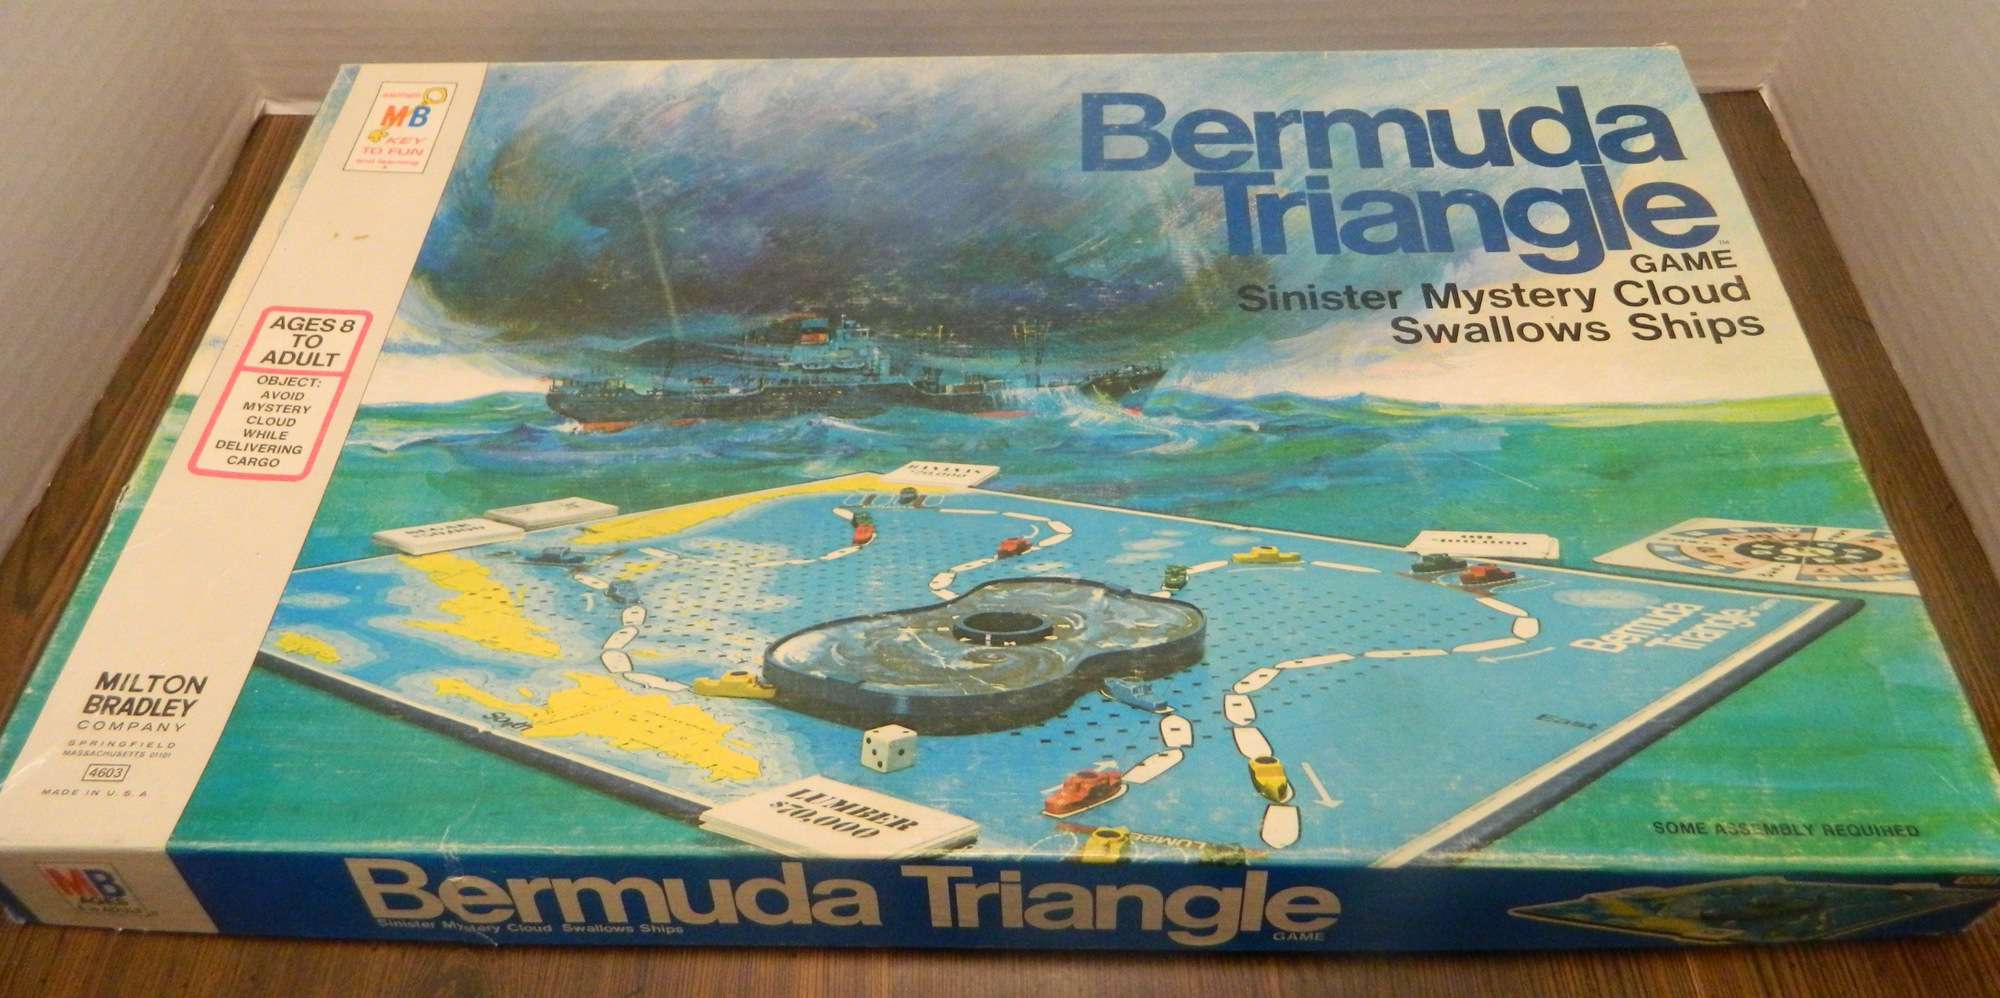 Bermuda Triangle Board Game Review and Instructions